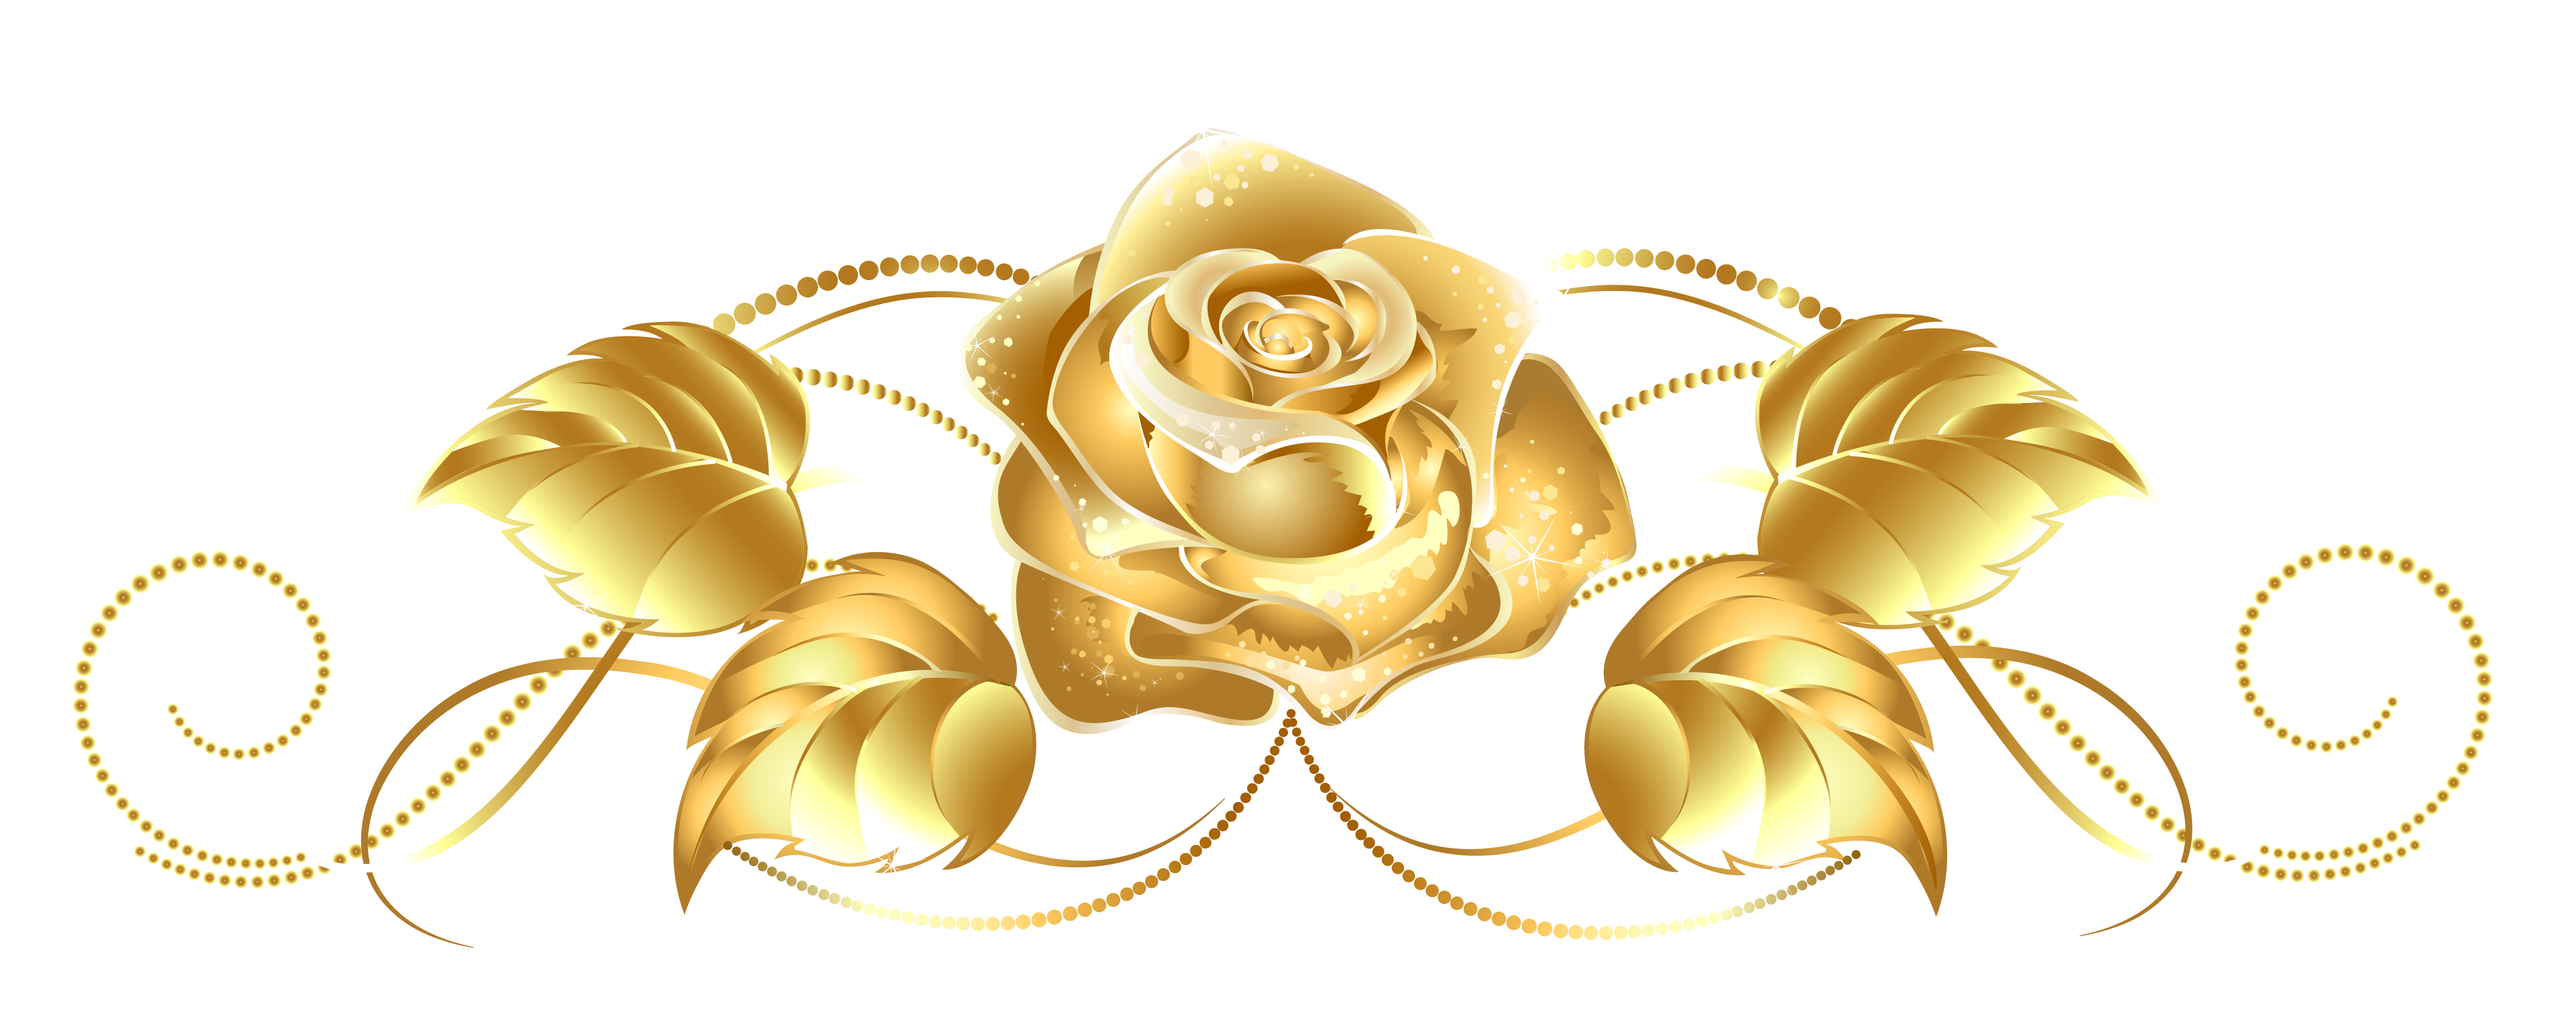 Gold Png Image Png Image - Gold, Transparent background PNG HD thumbnail